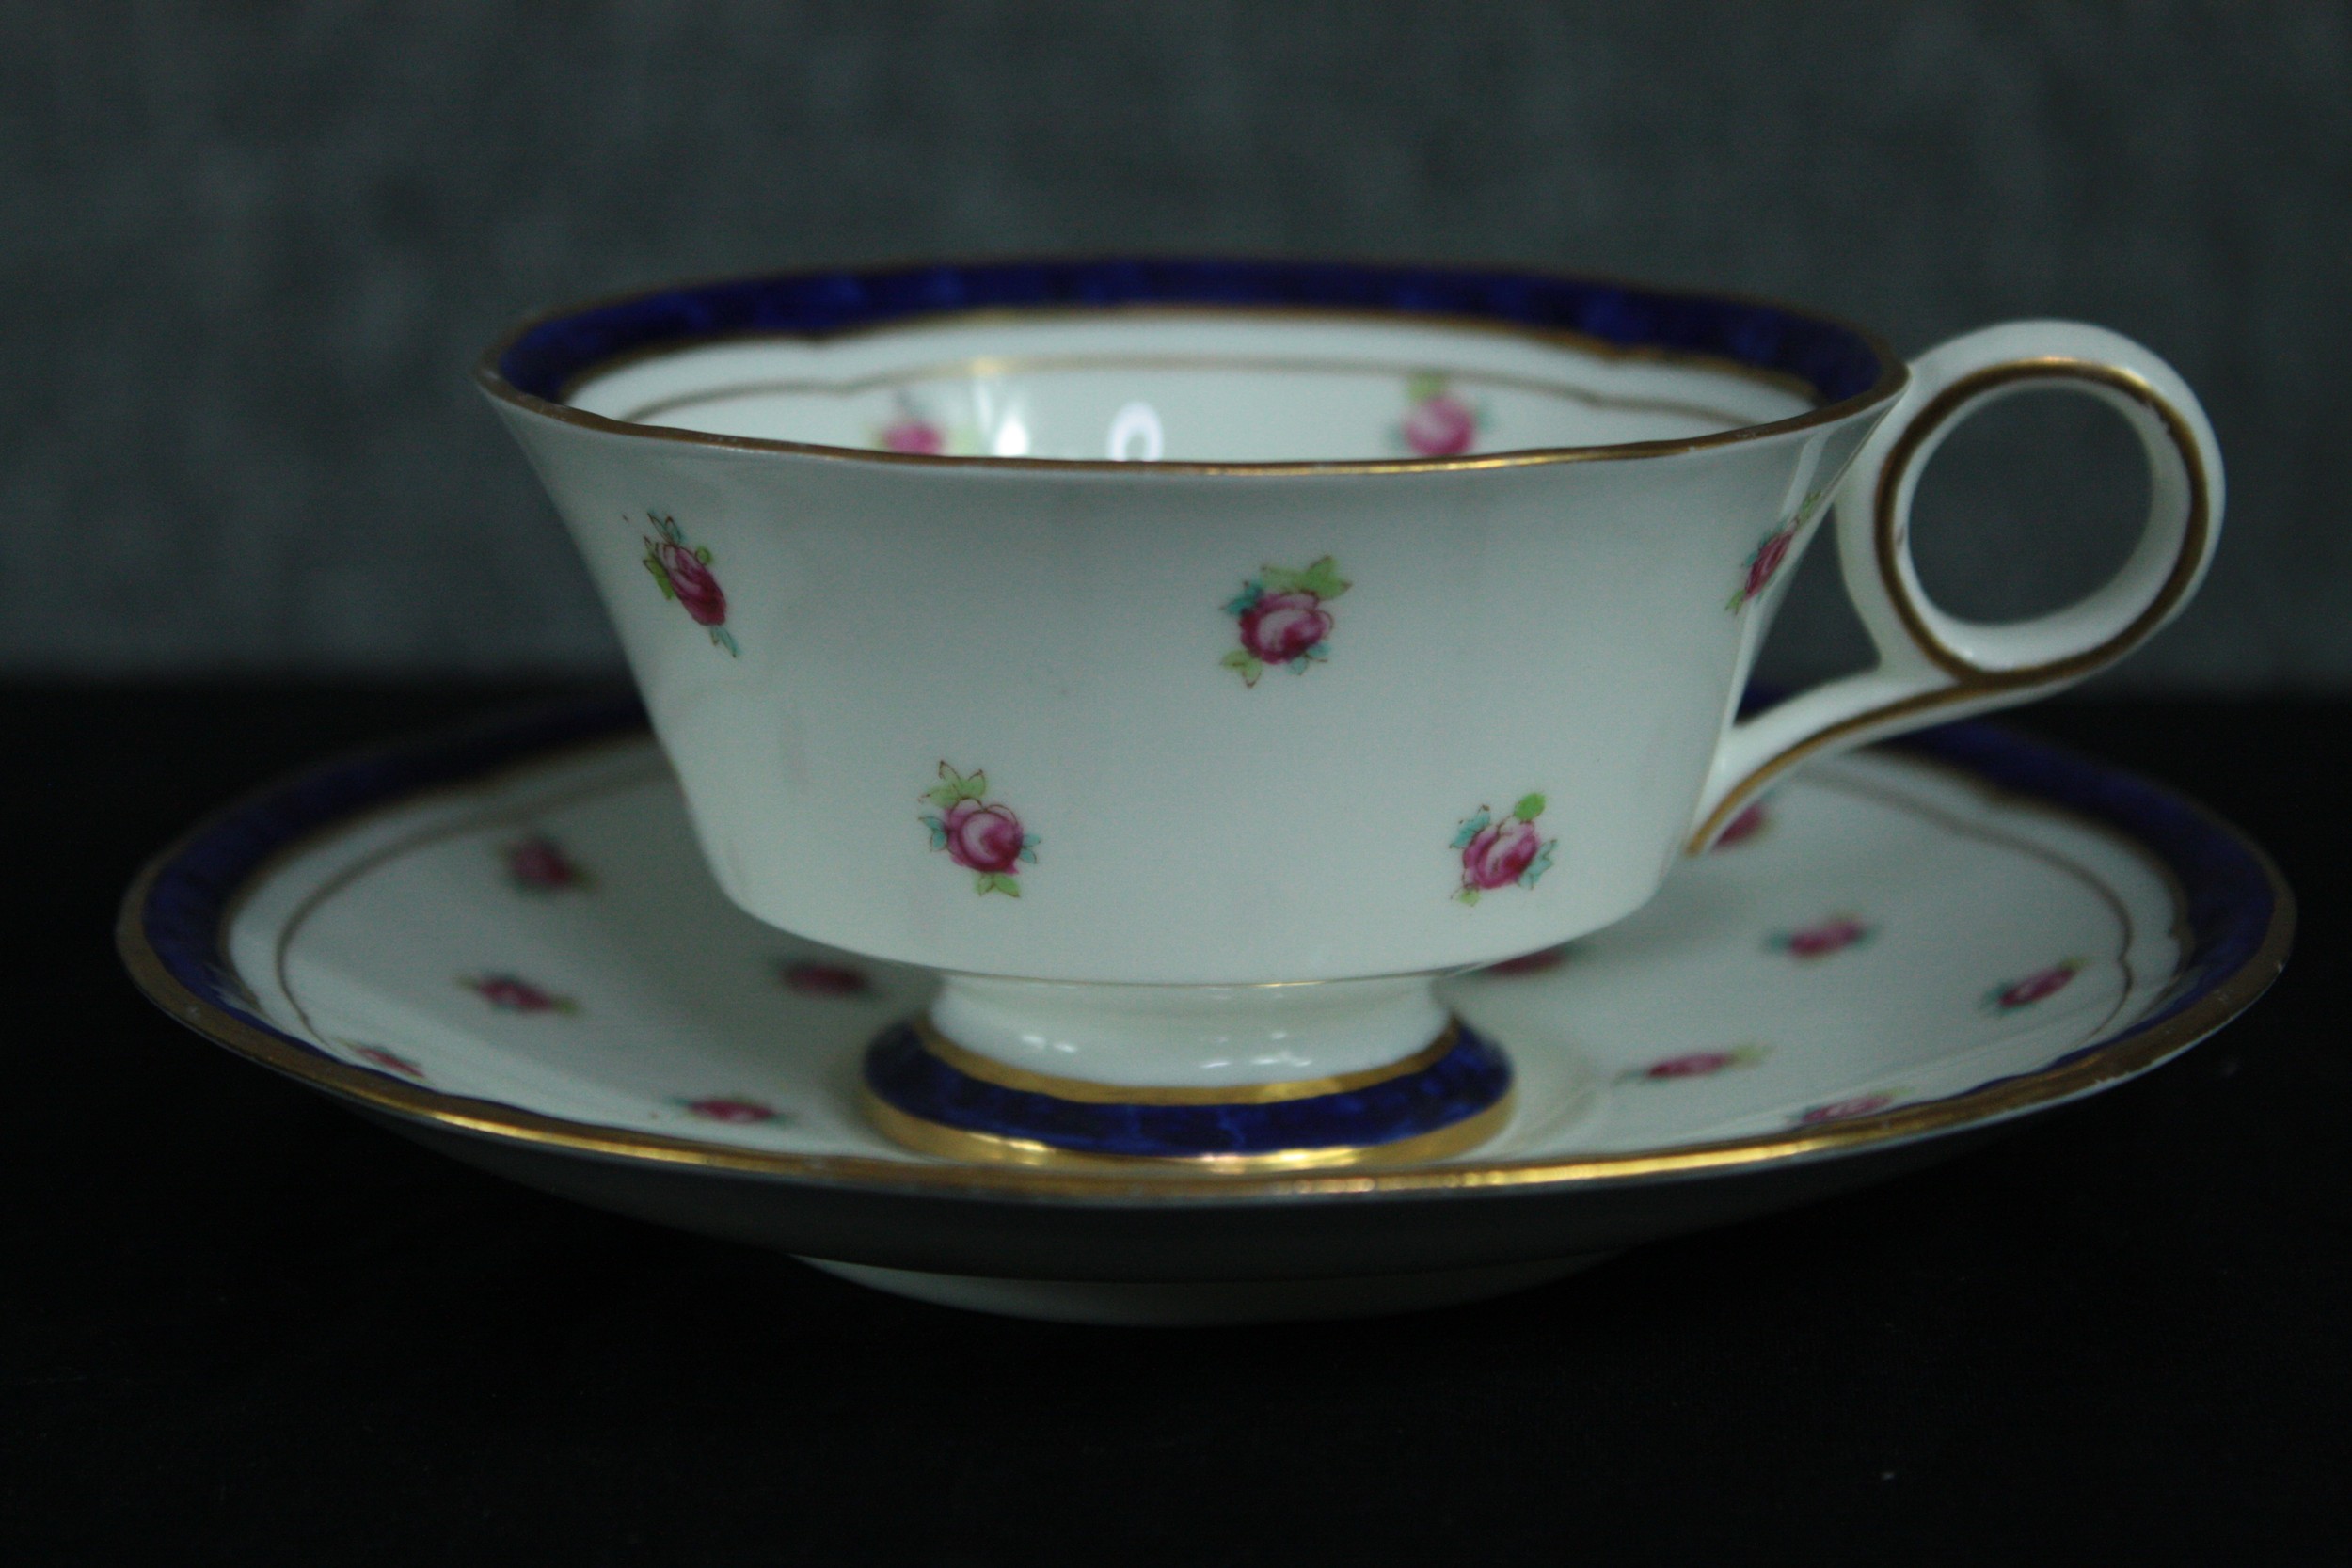 Cauldon tea set. Incomplete. Made up of eight cups and saucers, eight side plates, two saucers, a - Image 4 of 7